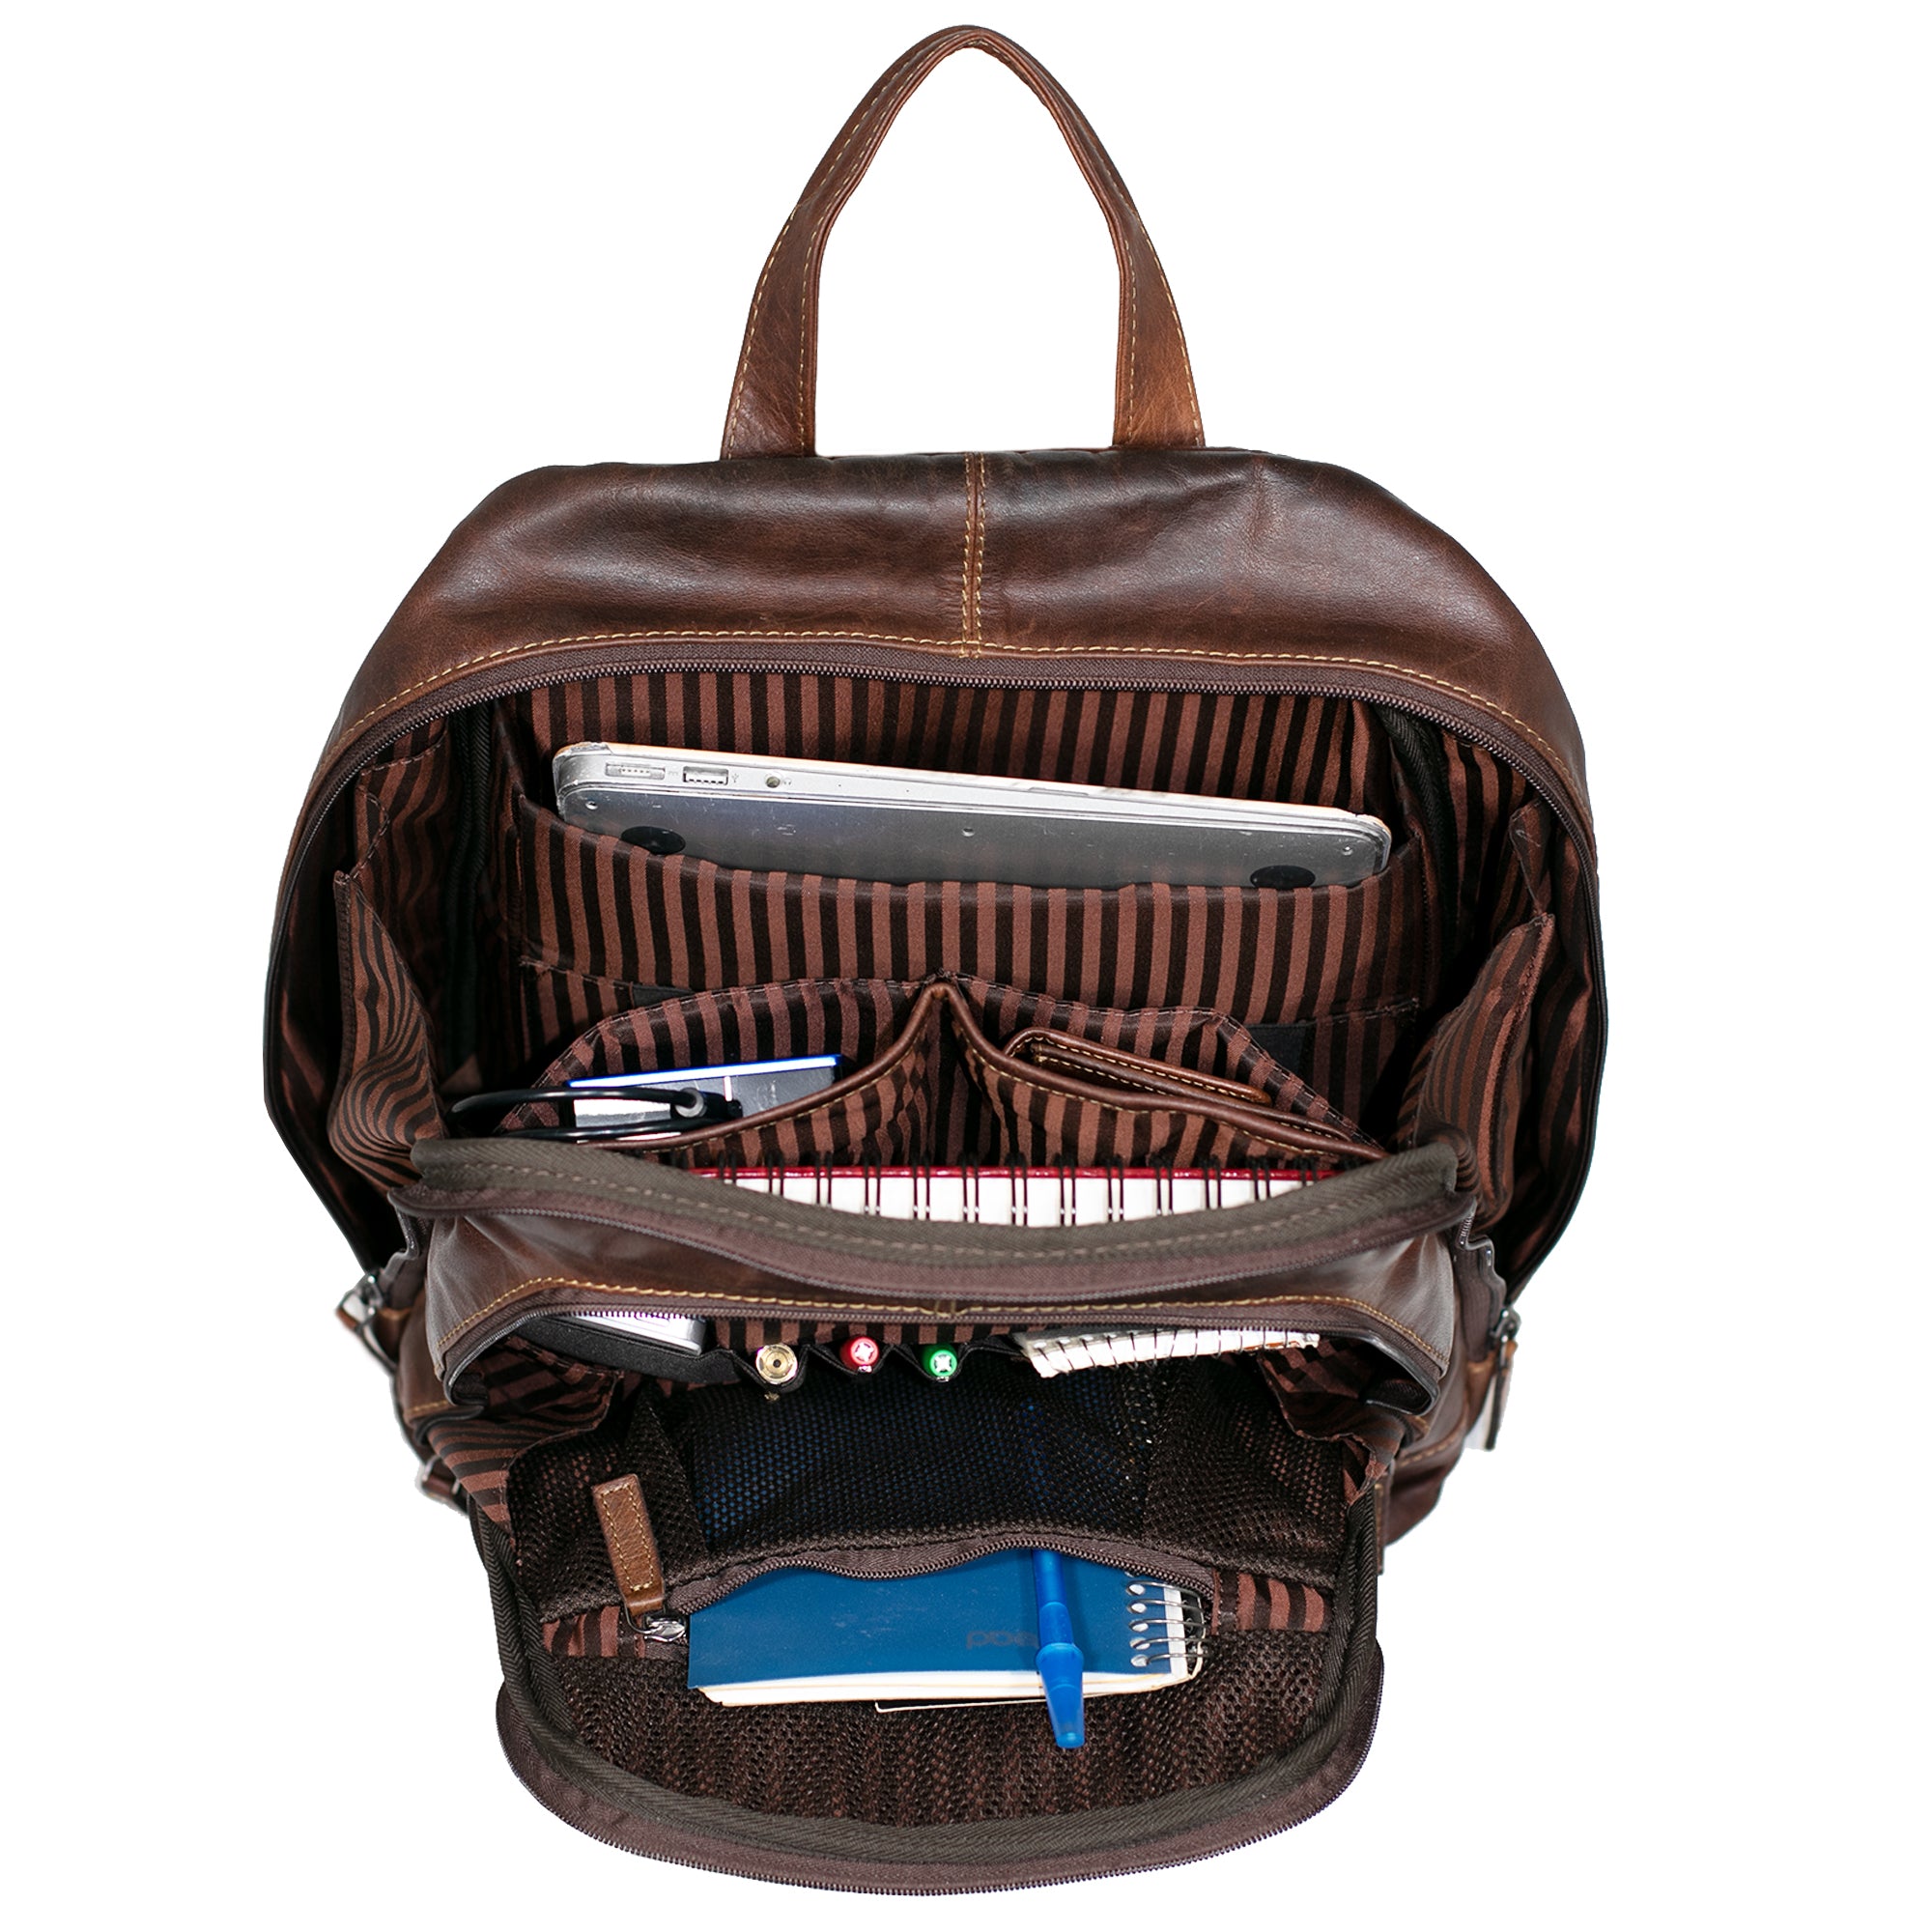 Jack Georges Voyager Small Convertible Messenger Backpack - Brown